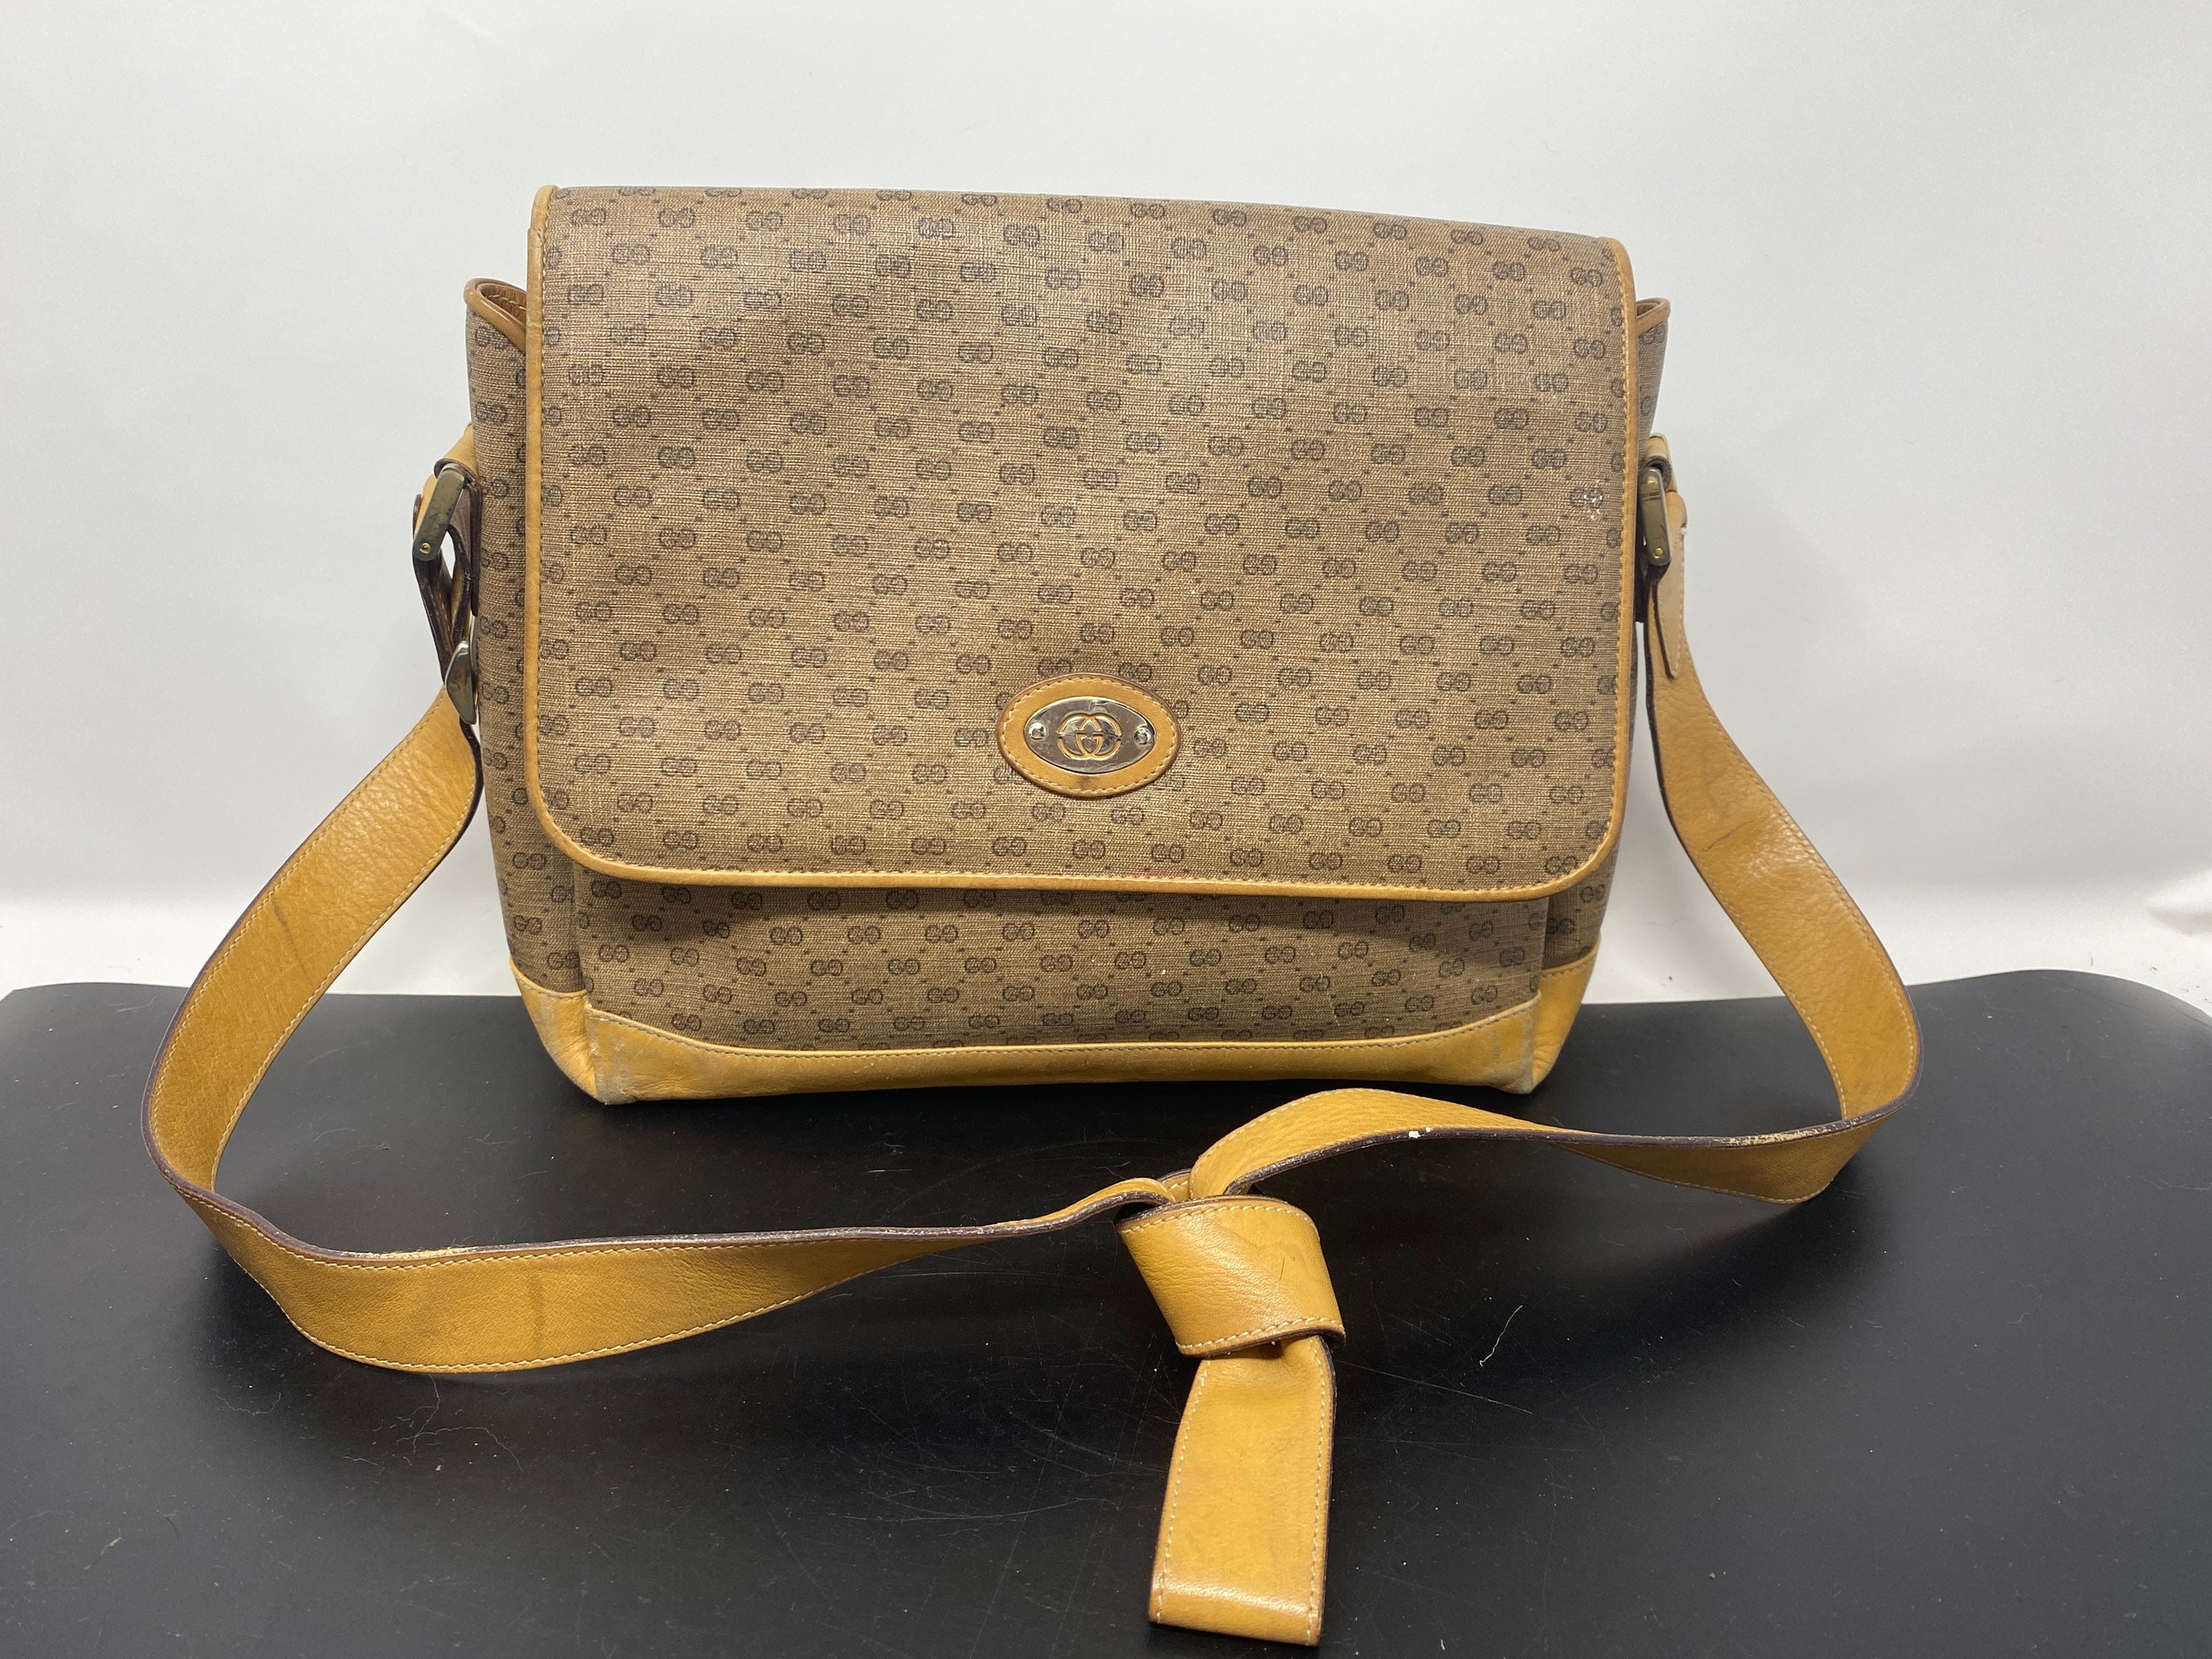 Authentic Gucci Dark Brown/beige Gsg Canvas and Leather Medium